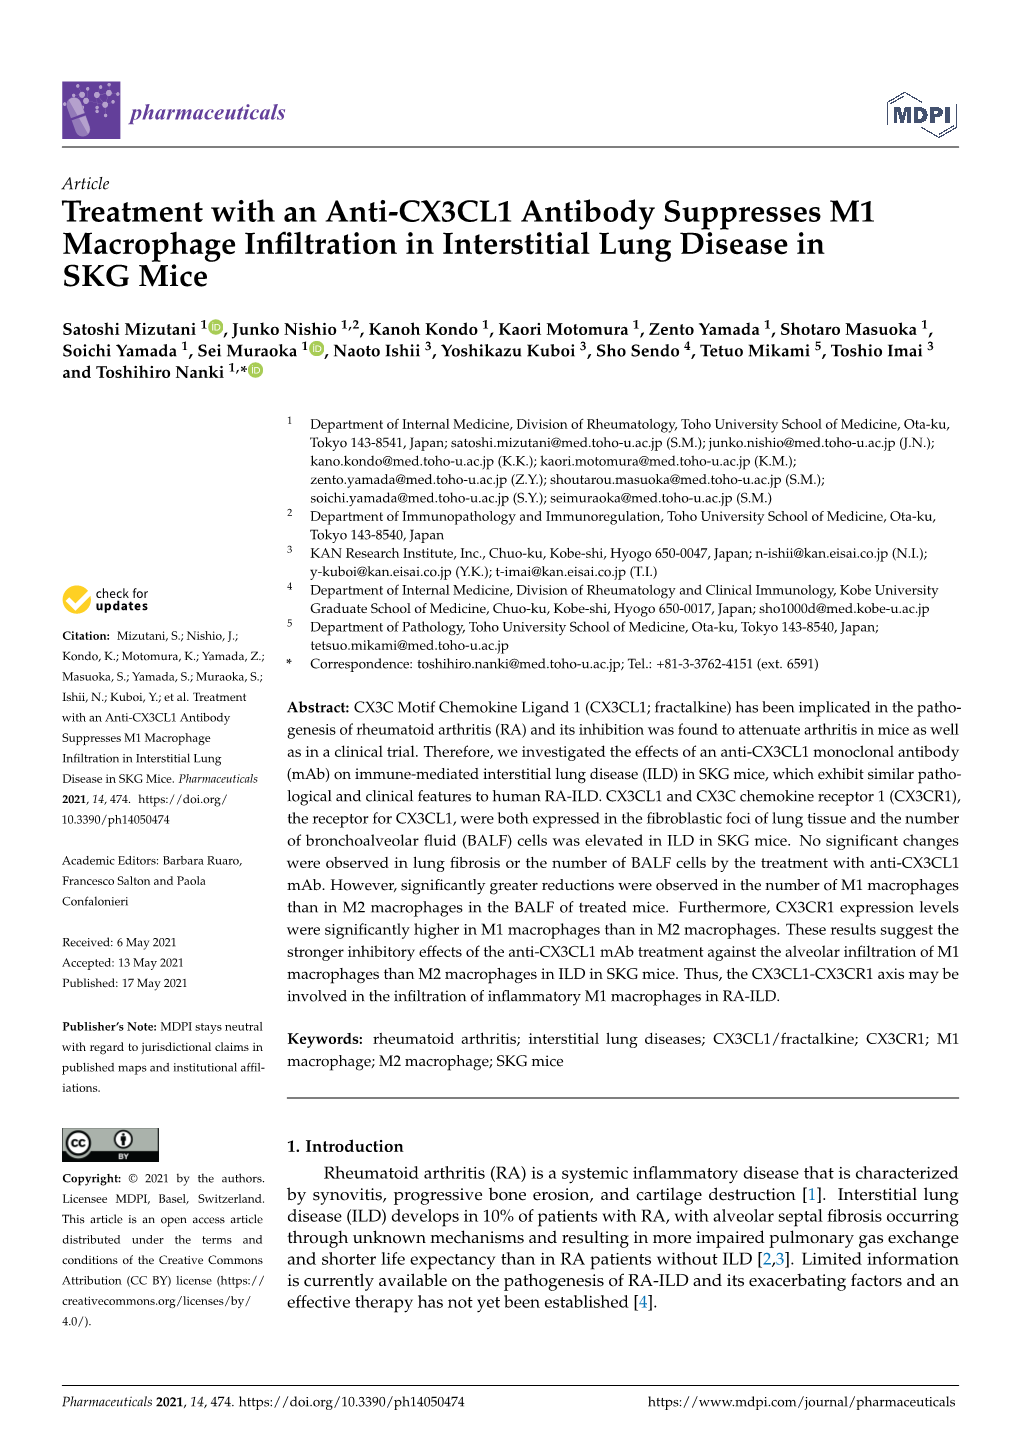 Treatment with an Anti-CX3CL1 Antibody Suppresses M1 Macrophage Inﬁltration in Interstitial Lung Disease in SKG Mice